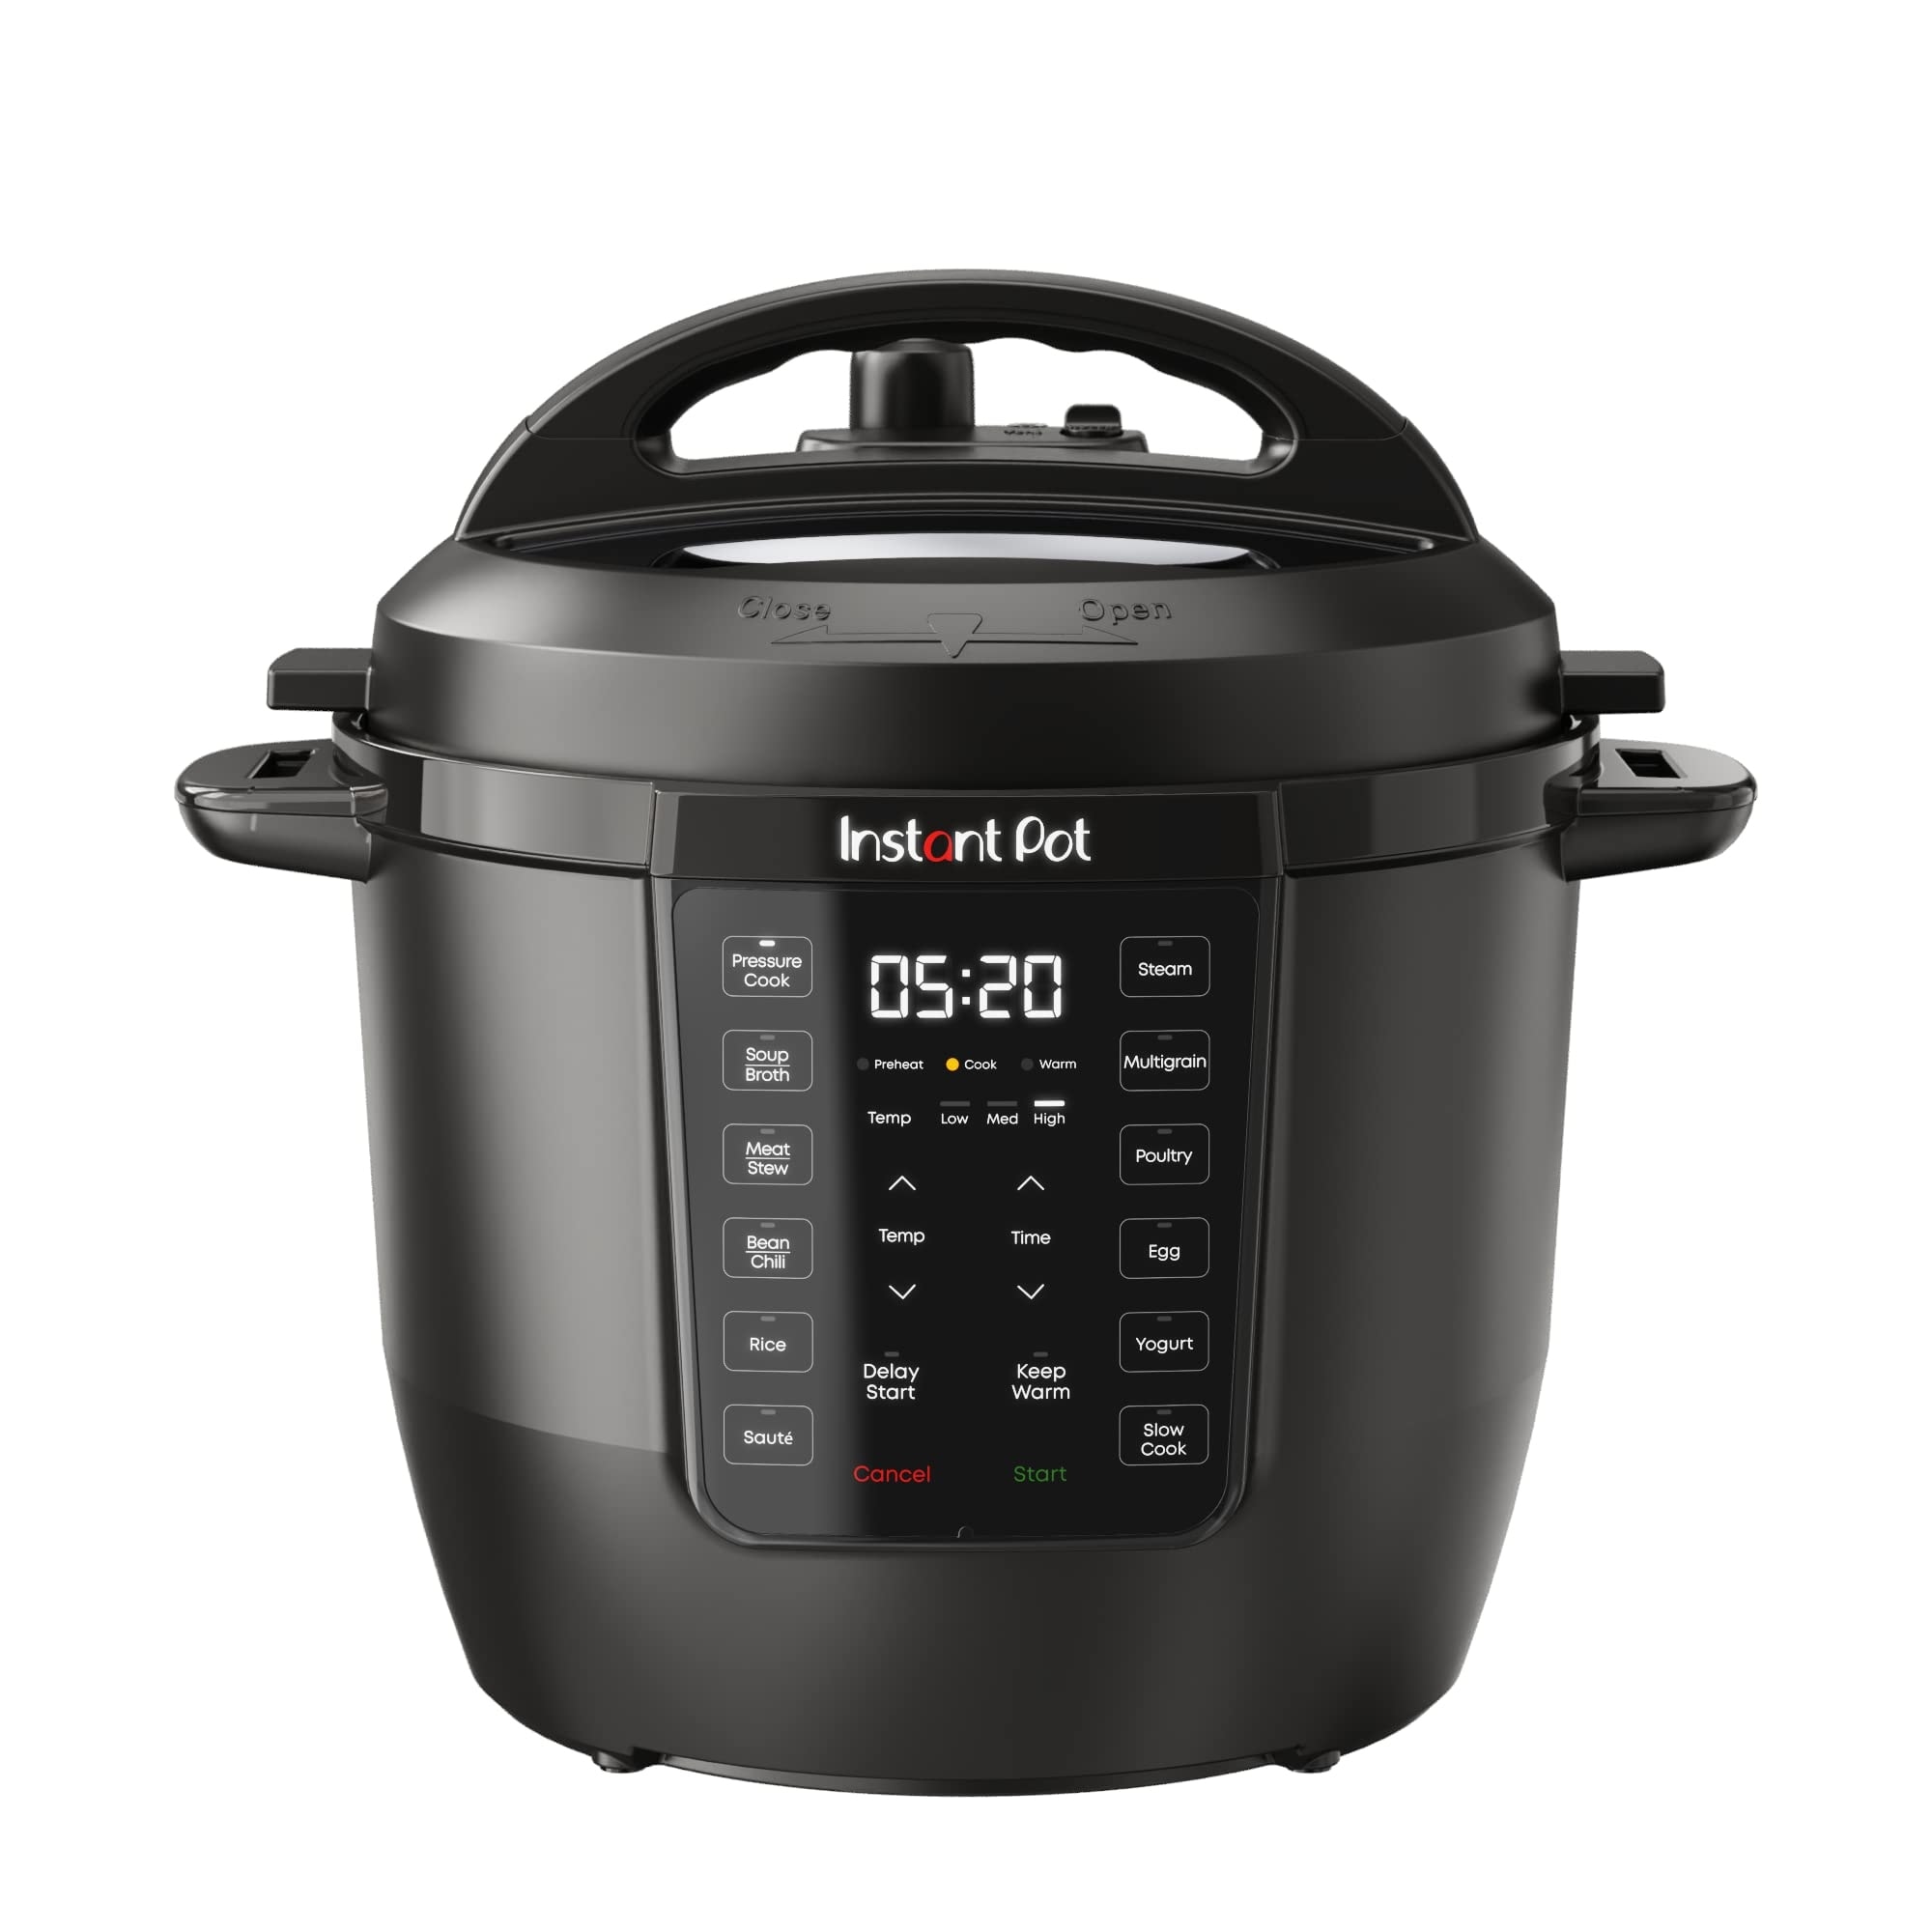 https://ak1.ostkcdn.com/images/products/is/images/direct/9253e6b0105916b3e6970a4d0362763c9bf9f697/6-Quart-Electric-Multi-Cooker%2C-Pressure-Cooker%2C-Slow-Rice-Steamer%2C-Yogurt-Maker%2C-%26-Warmer%2C-Includes-App-With-Over-800-Recipes.jpg